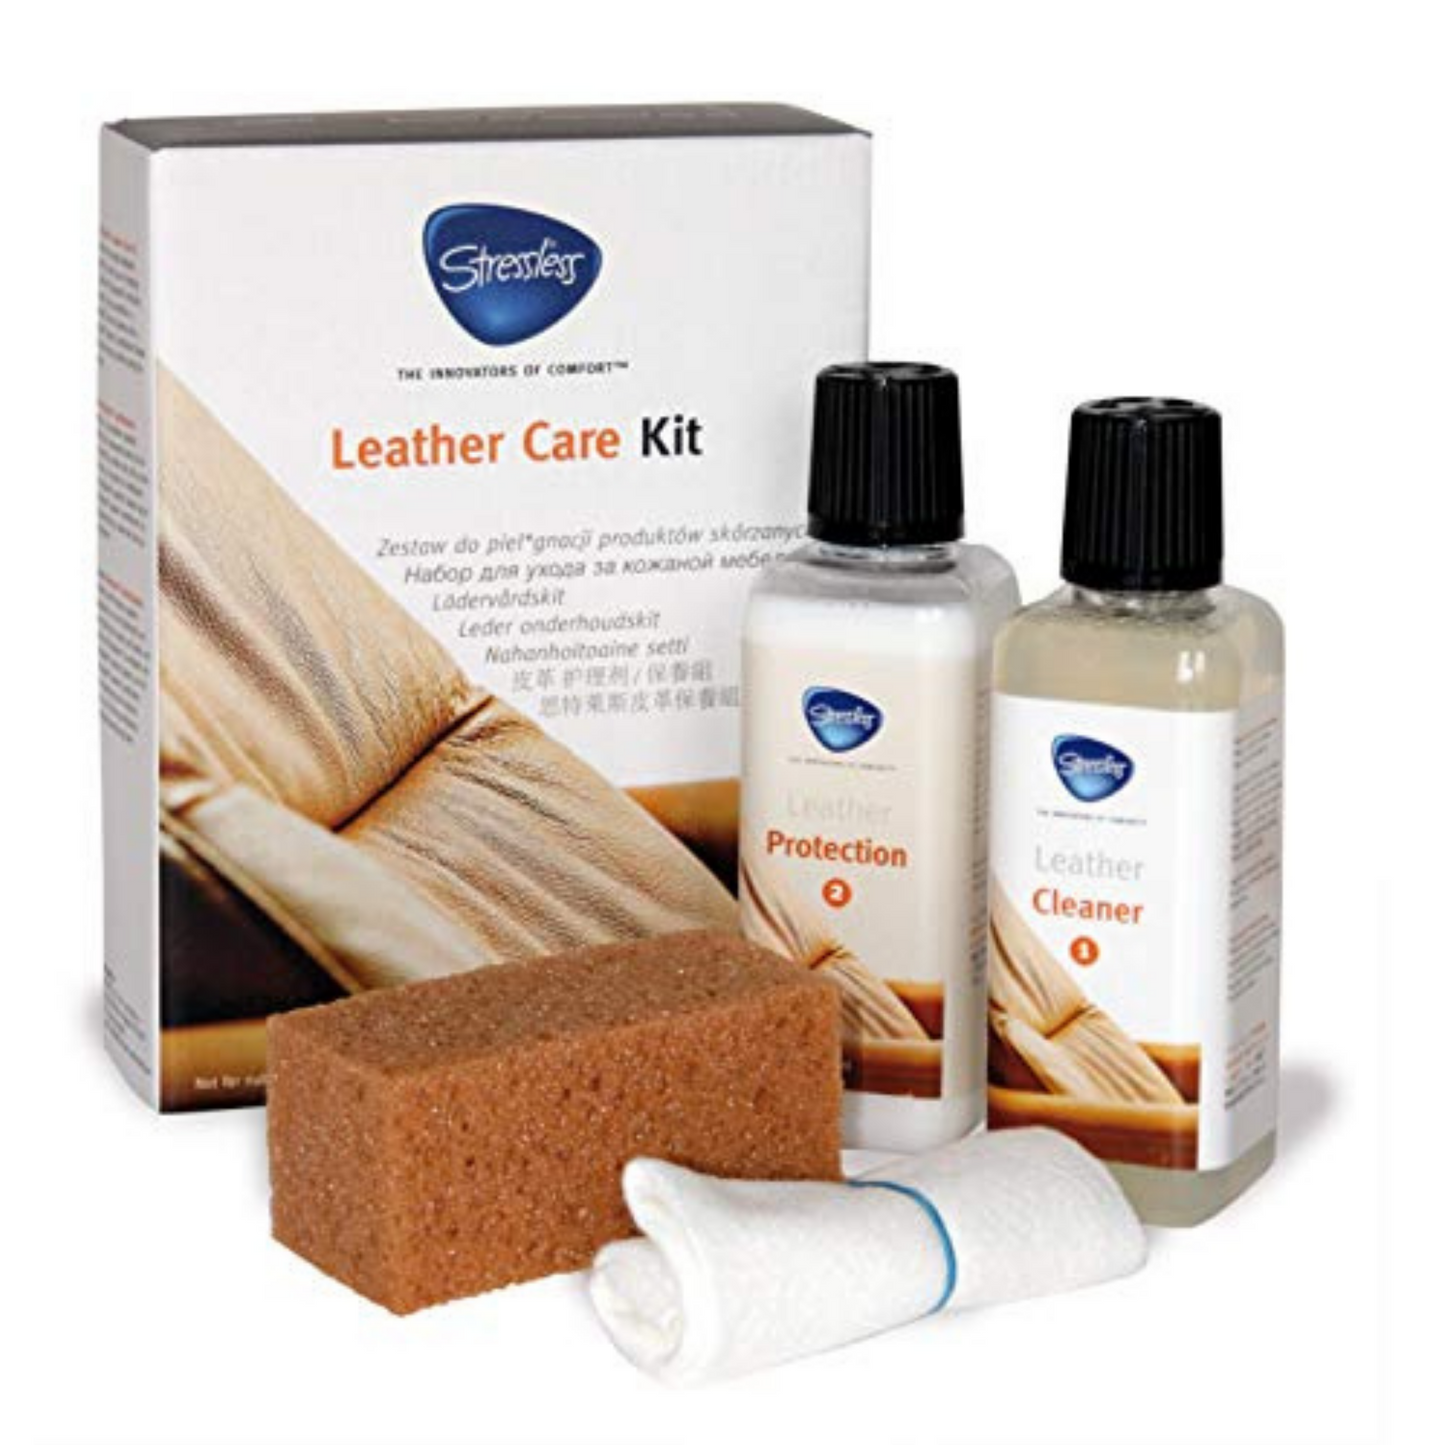 Leather Care Kit by Stressless